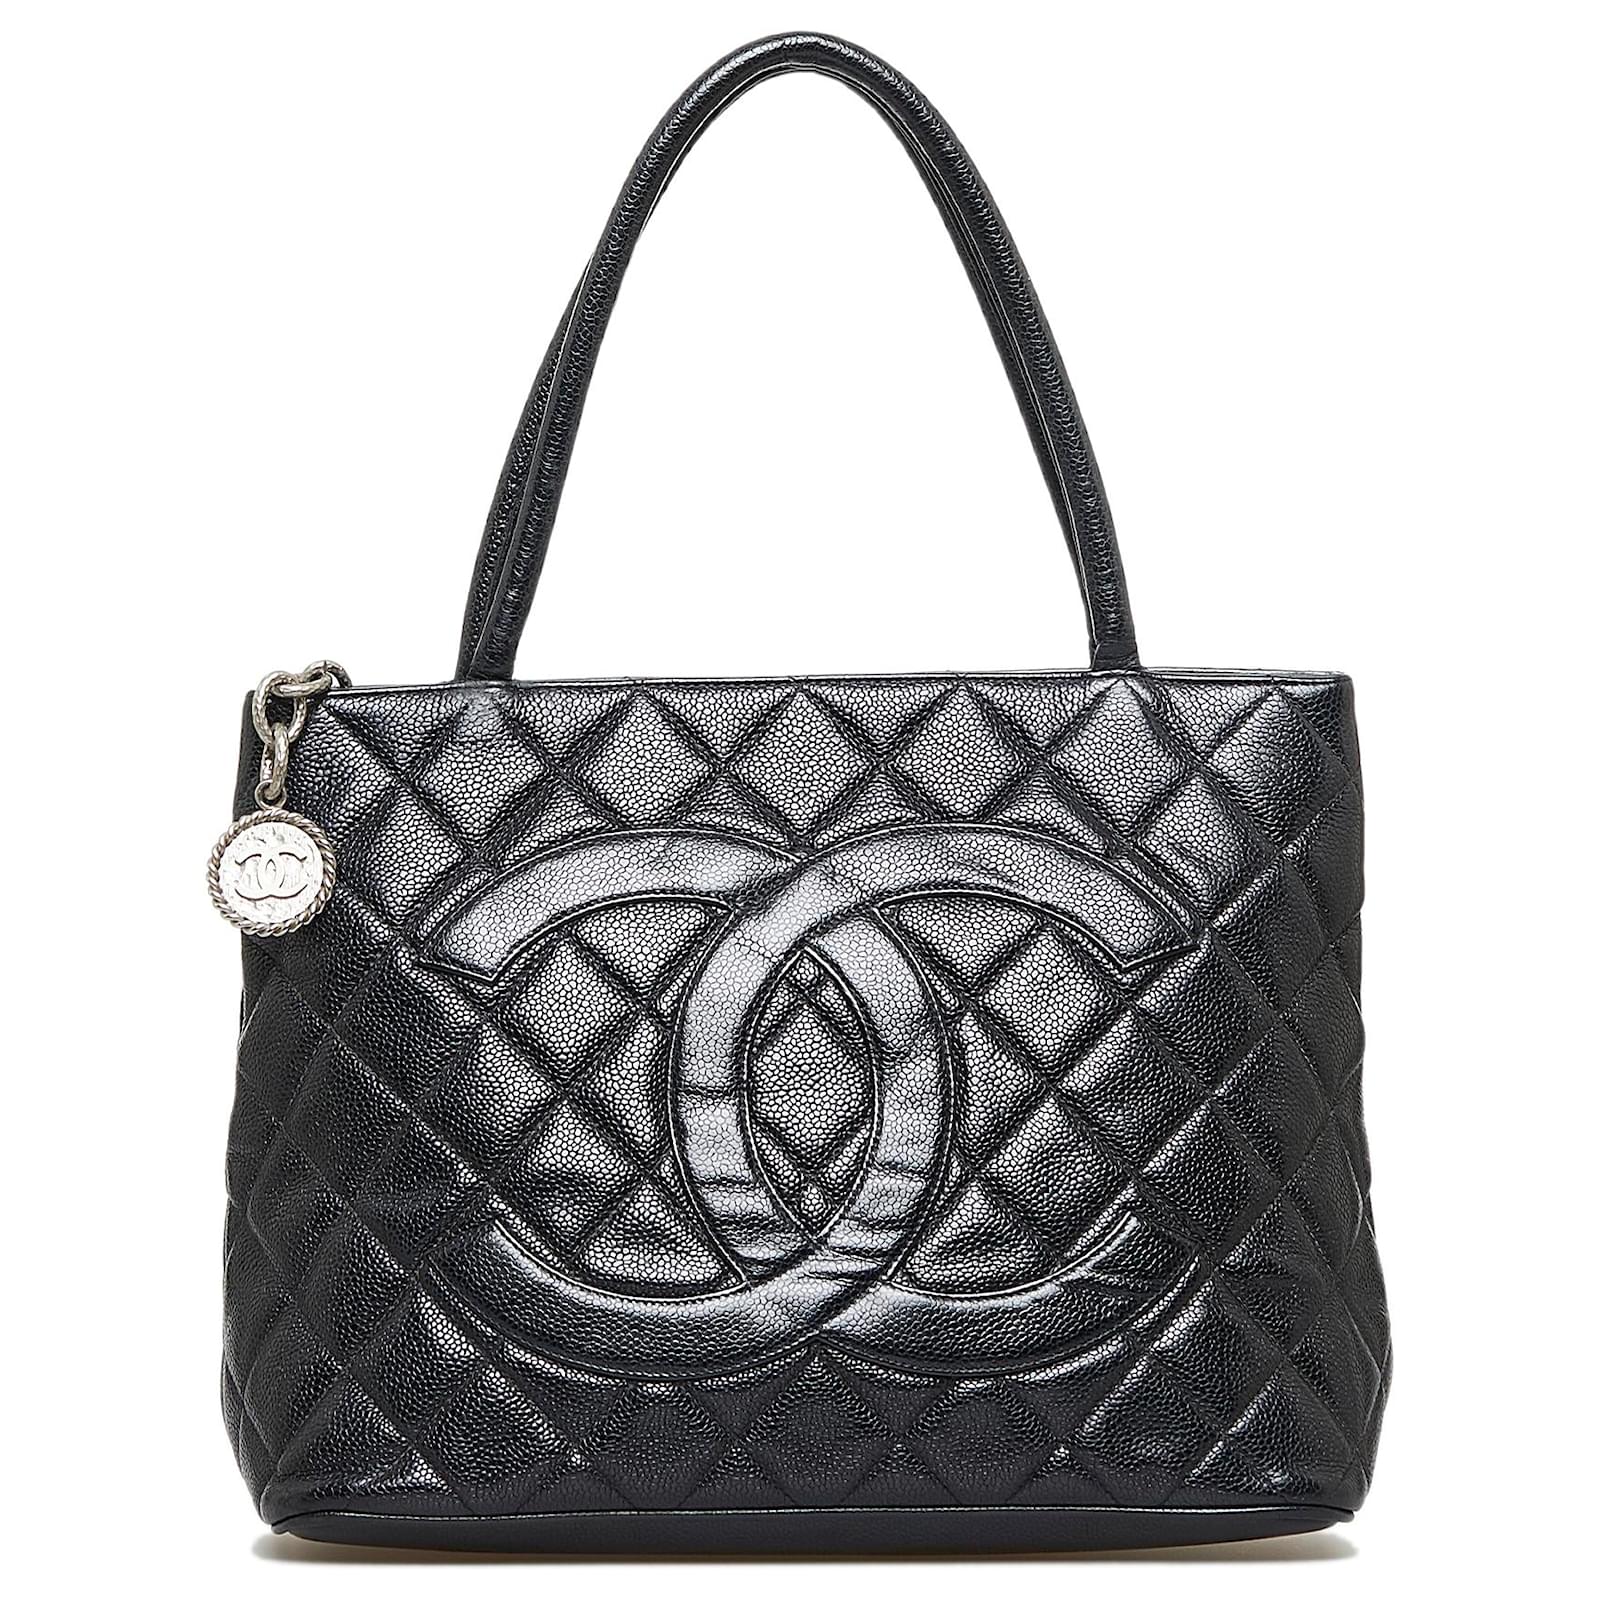 Chanel Pre-owned 2007 Medallion Leather Tote Bag - Black